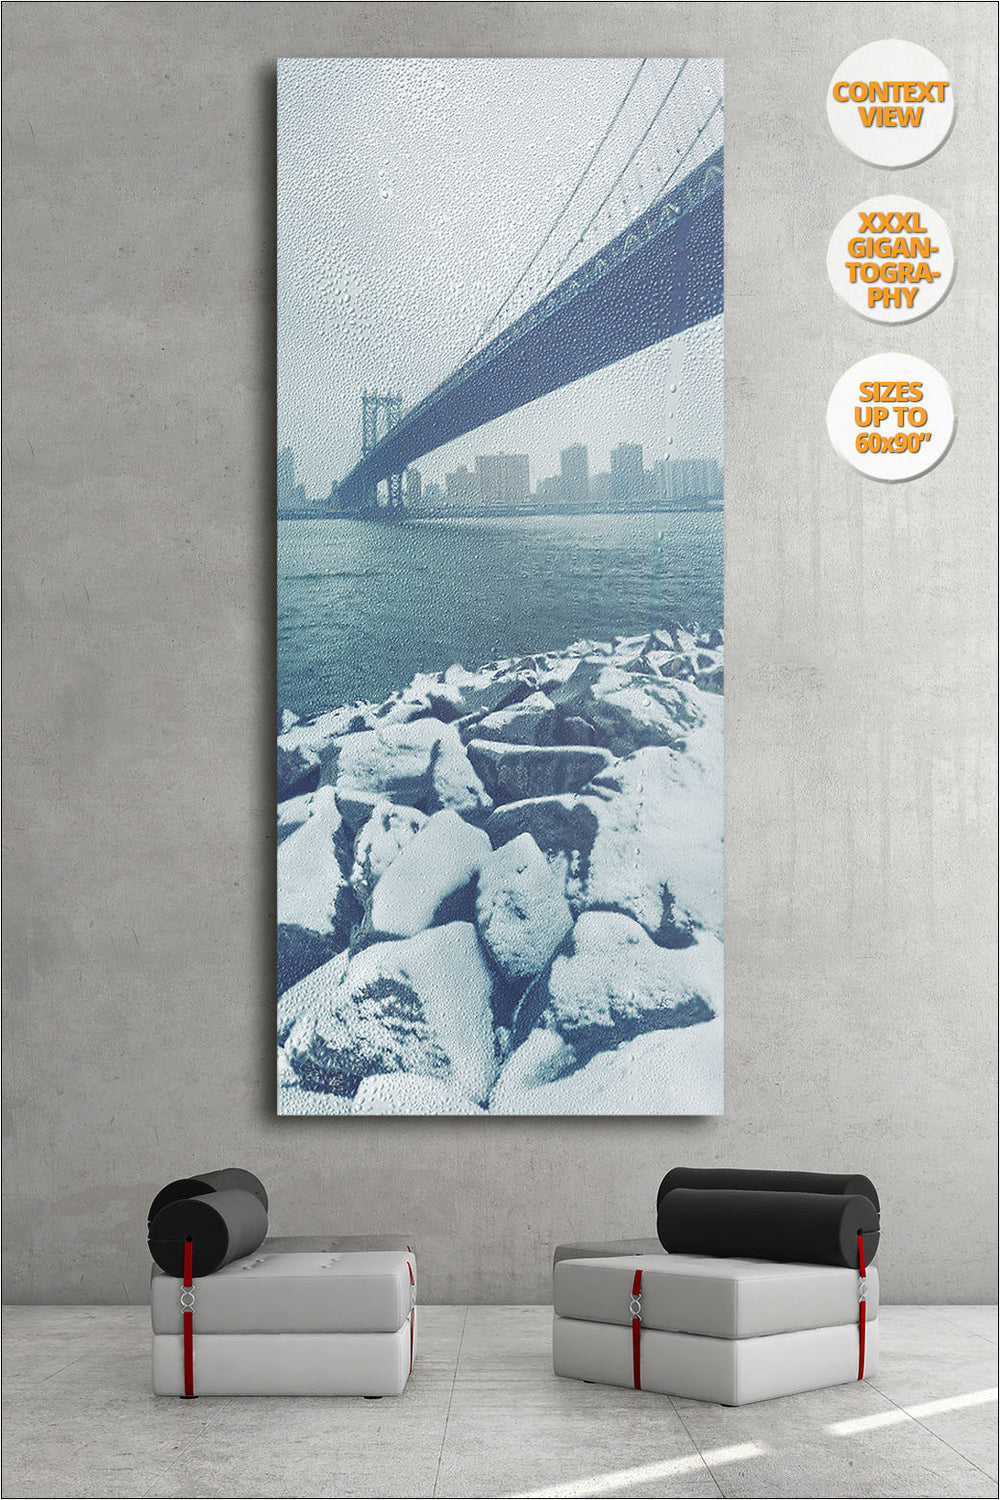 Manhattan Bridge in Blizzard, New York. | View of the Print hanged in Living Room.